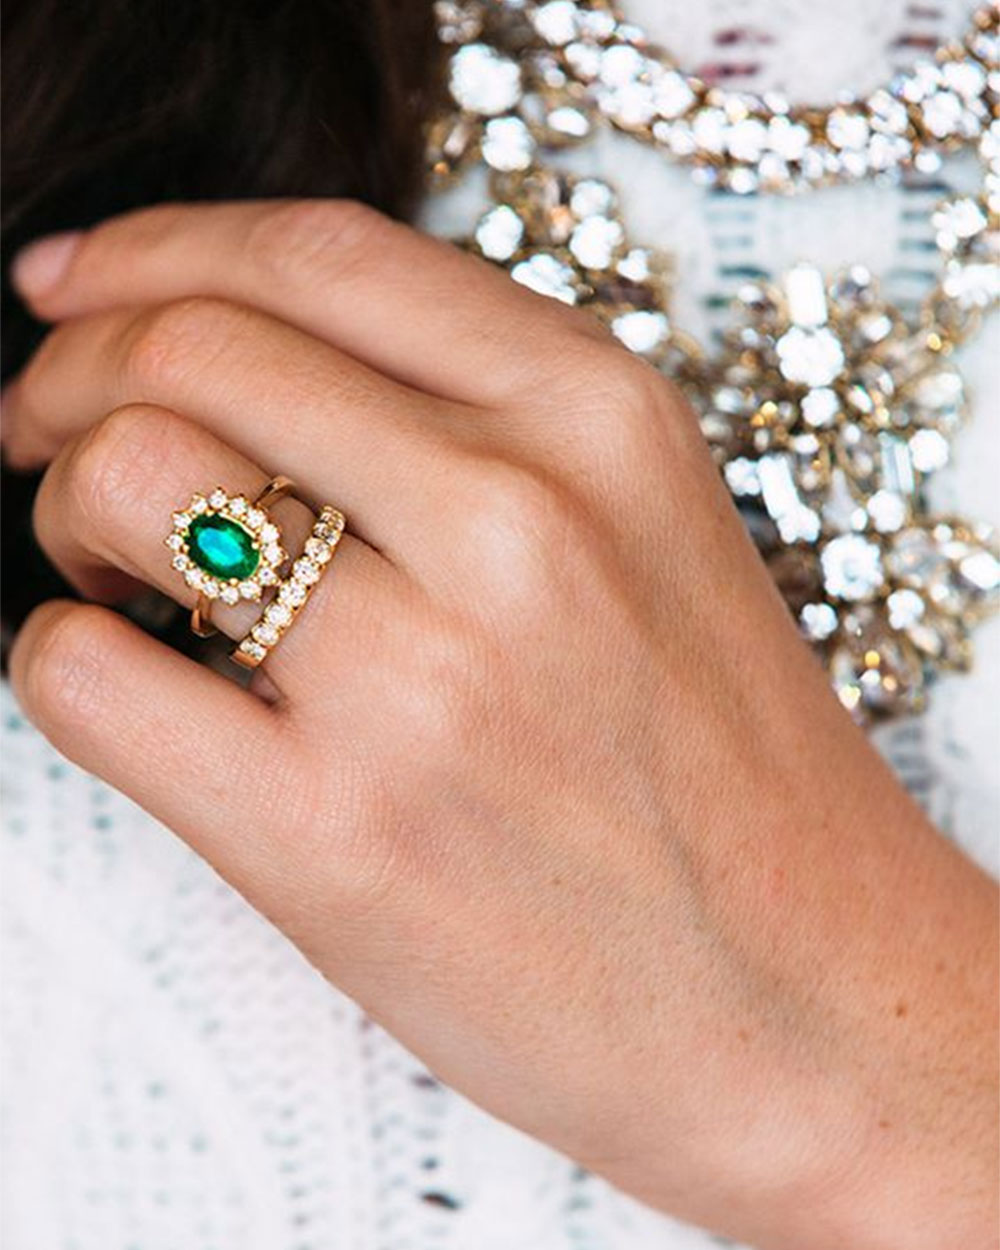 Women are ditching diamonds for these types of engagement